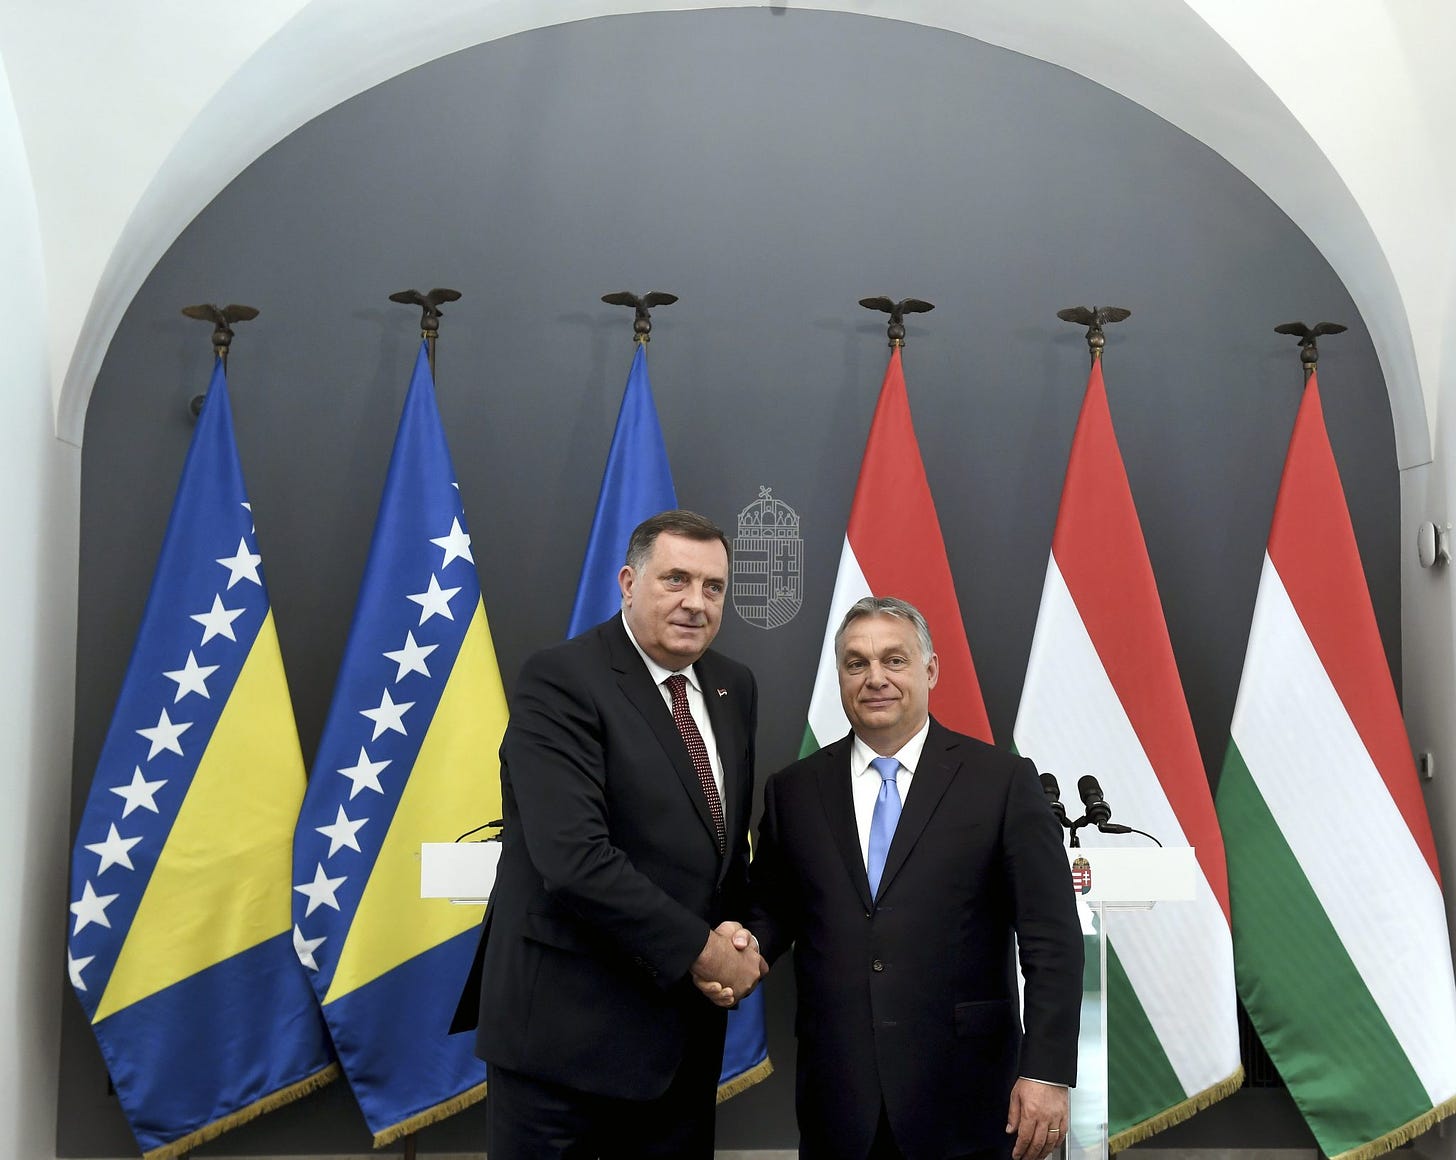 Orbán and Dodik Agree to Intensify Ties between Hungary and Republika  Srpska - Hungary Today